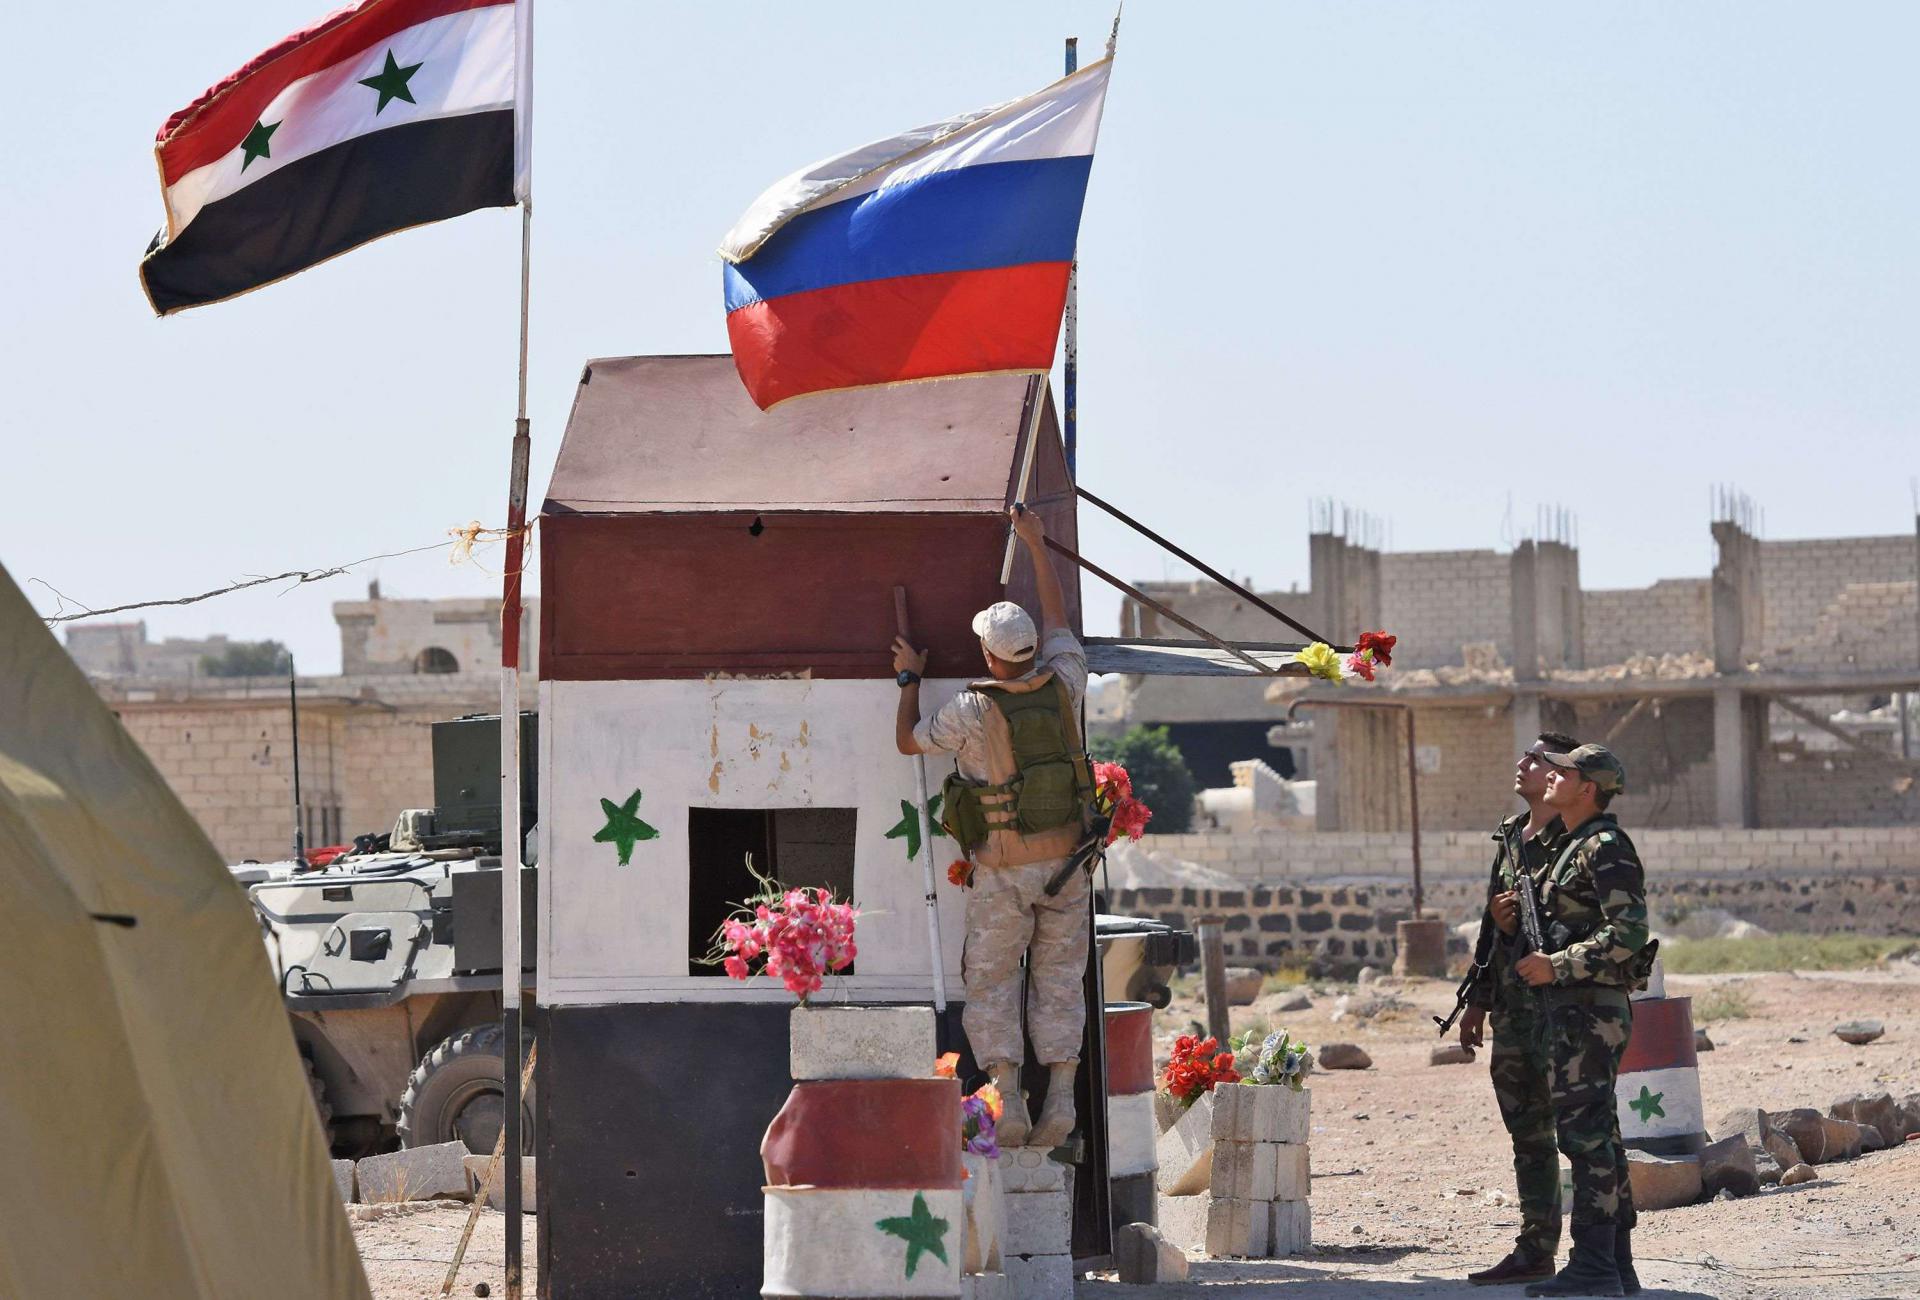 Russian soldiers place the national flag at the Abu Duhur crossing on the eastern edge of Idlib province on September 25, 2018, as Syrian families cross from rebel-held areas to regime-held areas.